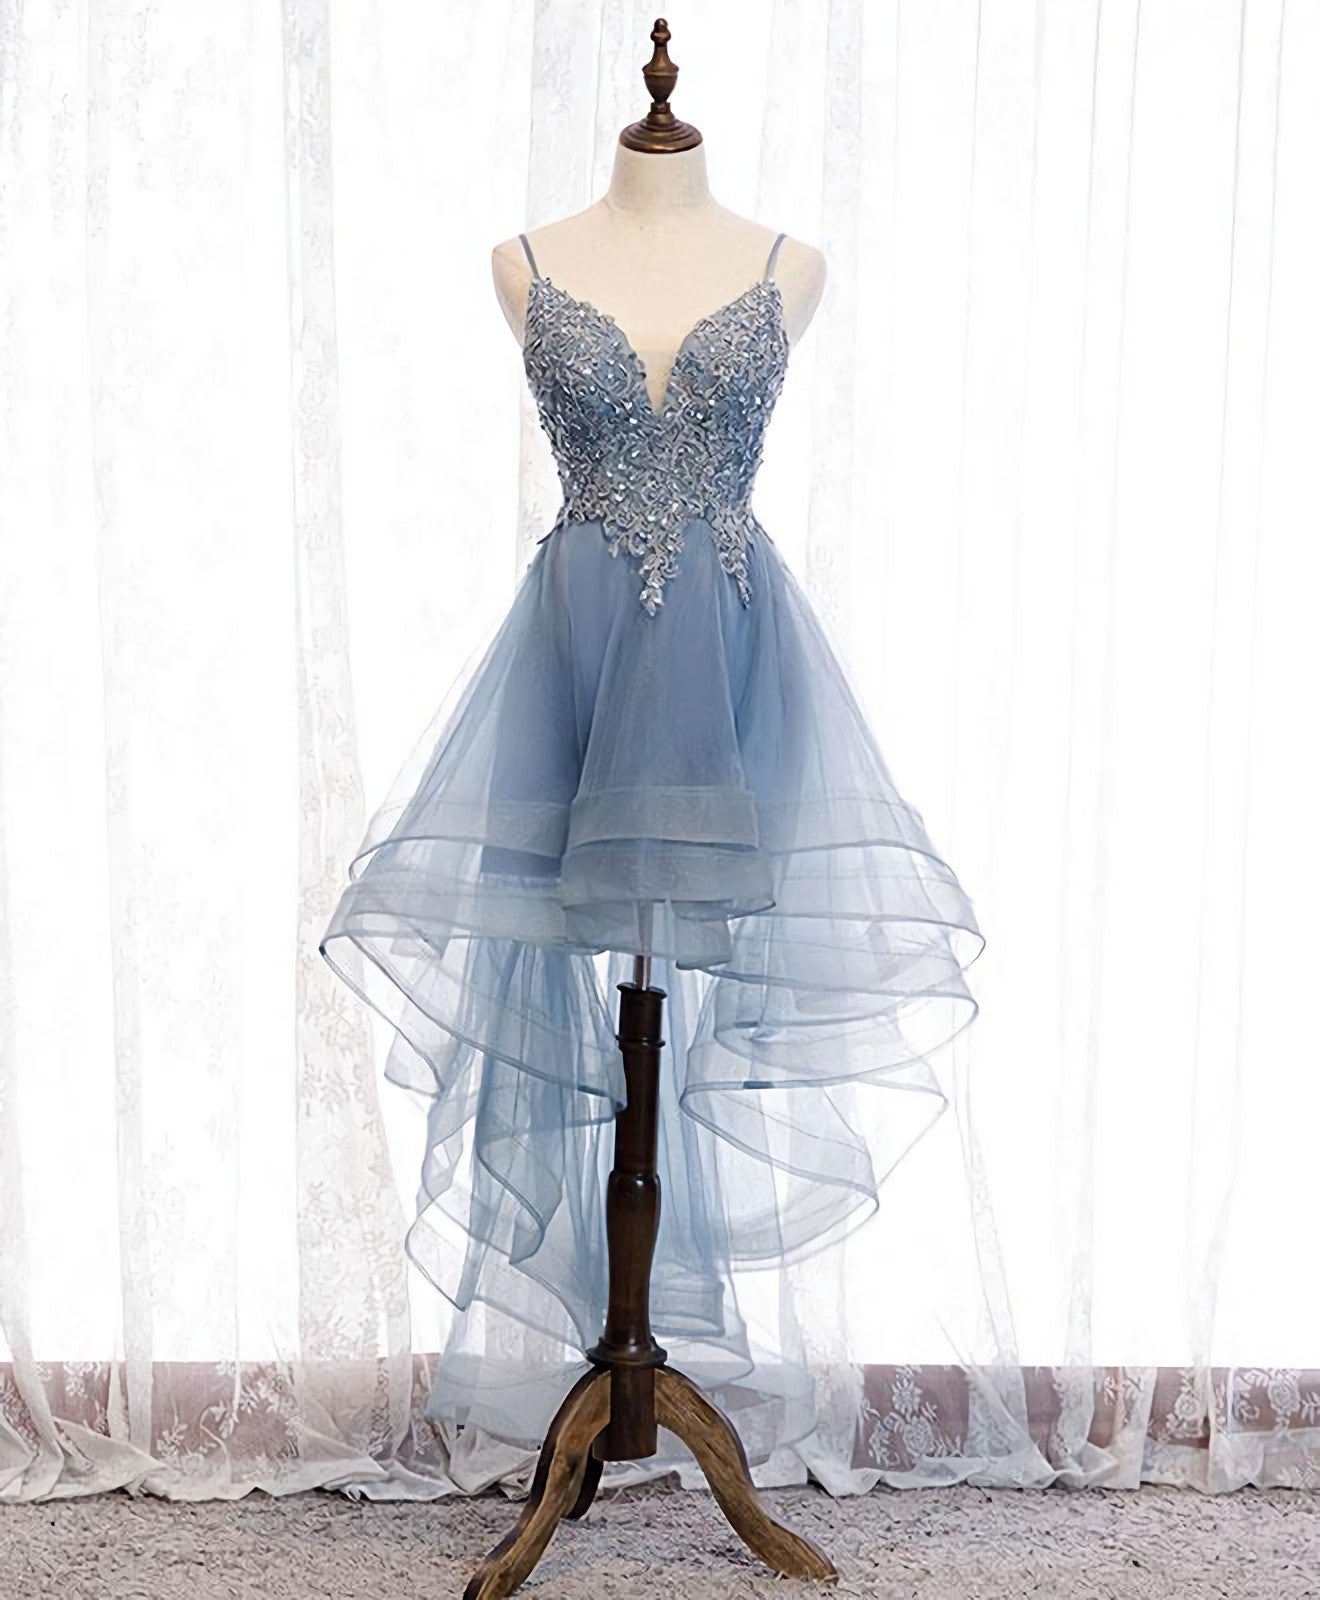 Blue Sweetheart Tulle Lace High Low Corset Prom Dress, Blue Corset Homecoming Dress outfit, Prom Dress Style